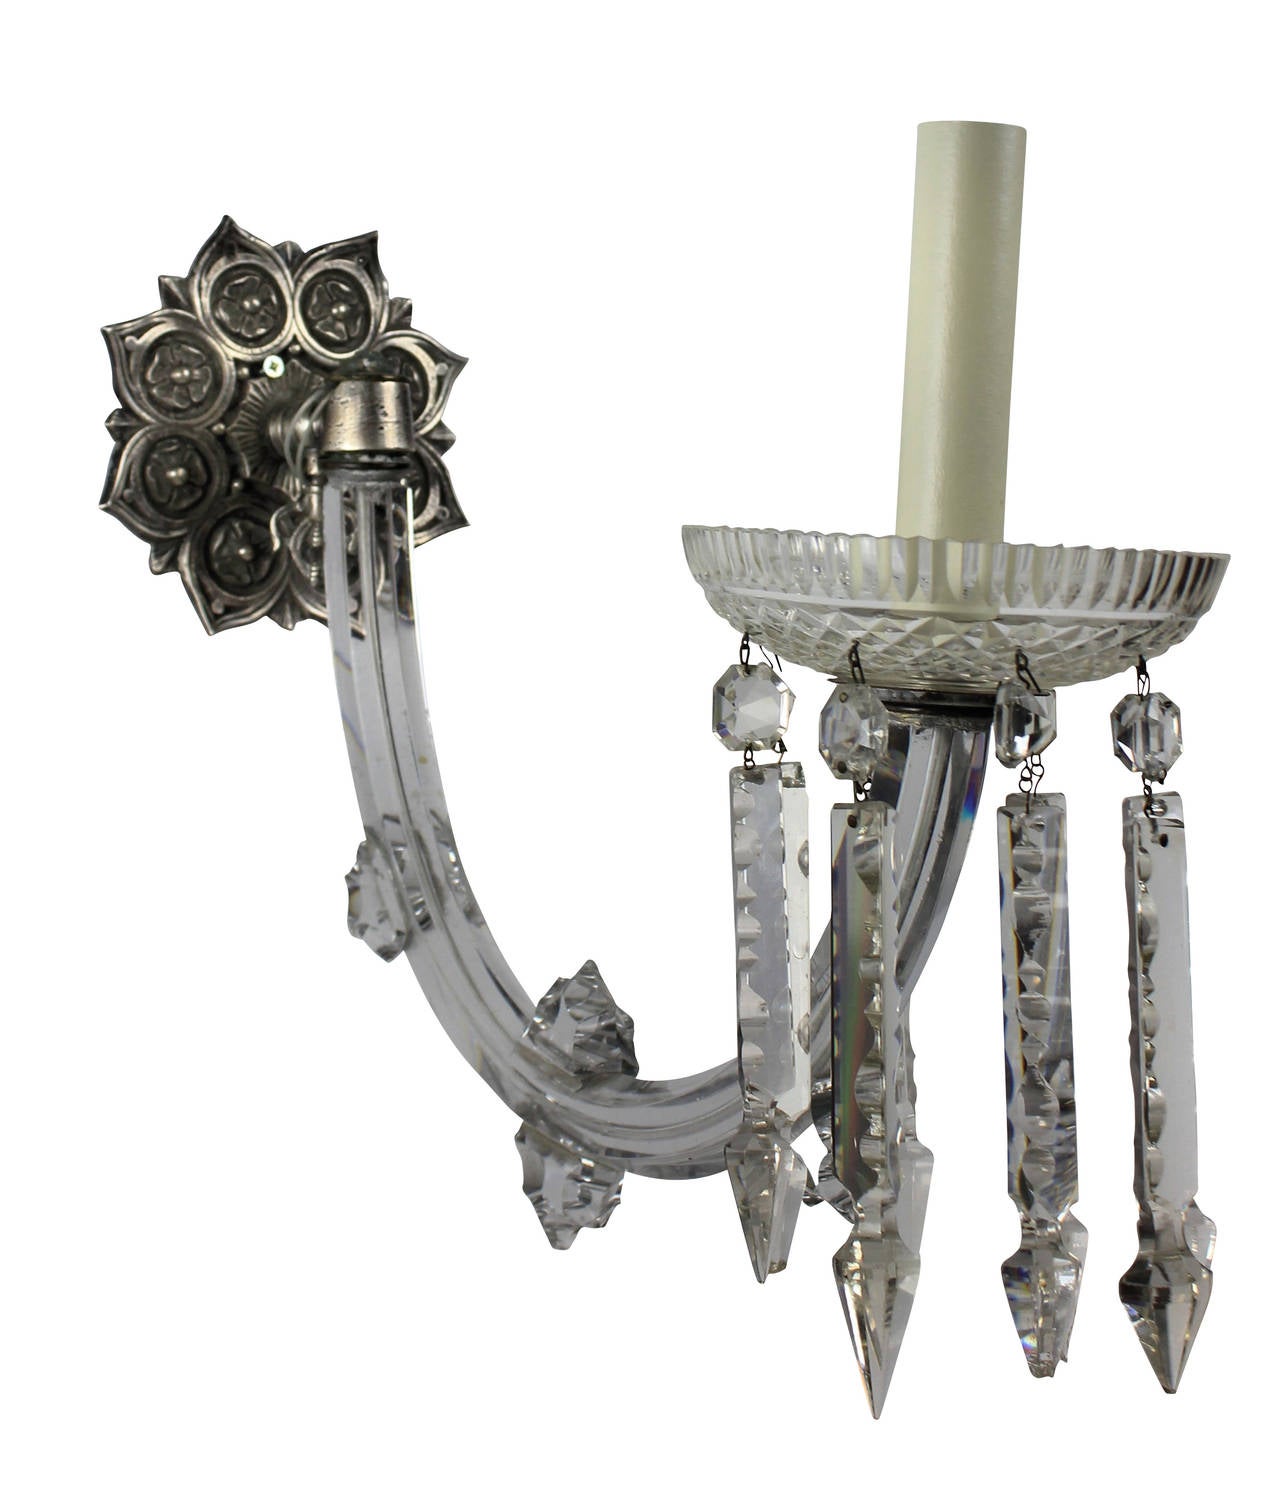 A pair of good quality English single arm sconces with large up-swept handcut-glass arms with decorative glass finials and a finely cut dish with pendants. The metal work of silvered bronze.